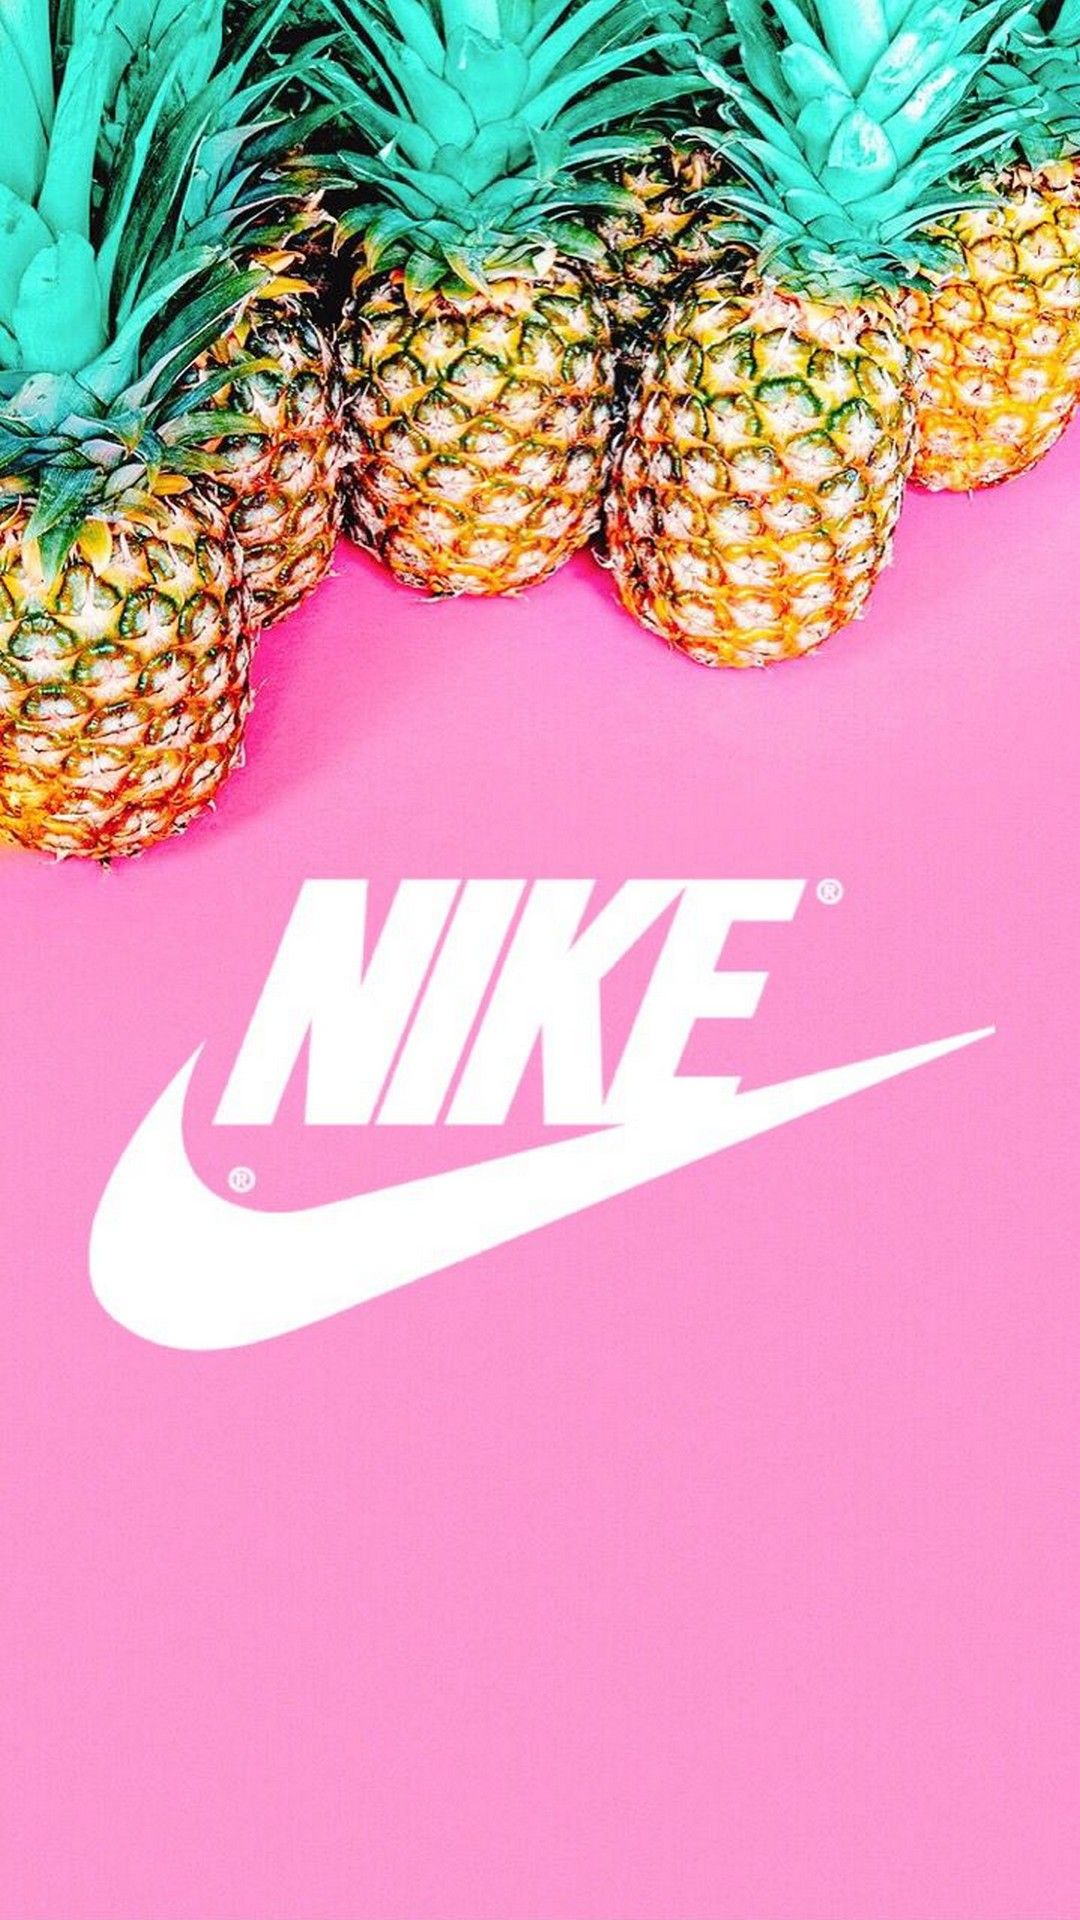 Nike Pineapple Pink Backgrounds